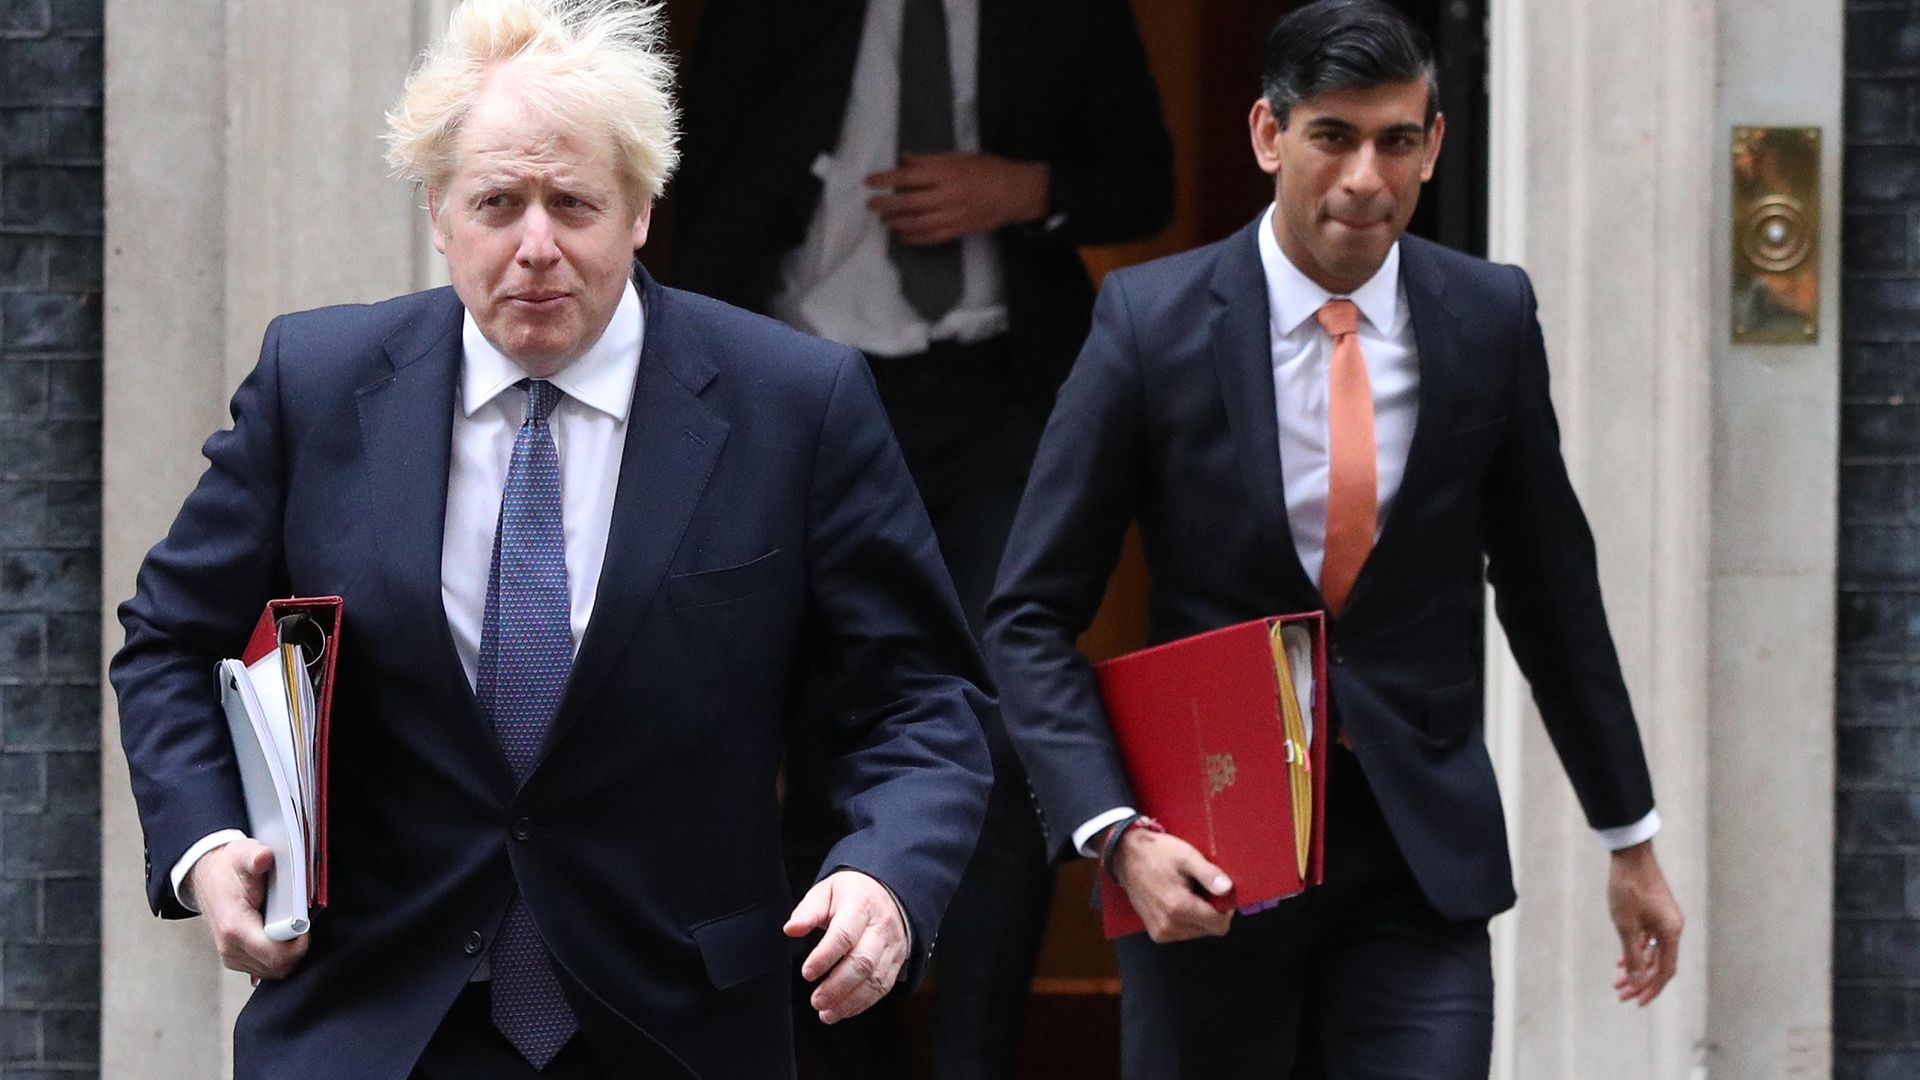 Prime minister Boris Johnson (left) and chancellor Rishi Sunak leave 10 Downing Street London, ahead of a Cabinet meeting at the Foreign and Commonwealth Office. - Credit: PA